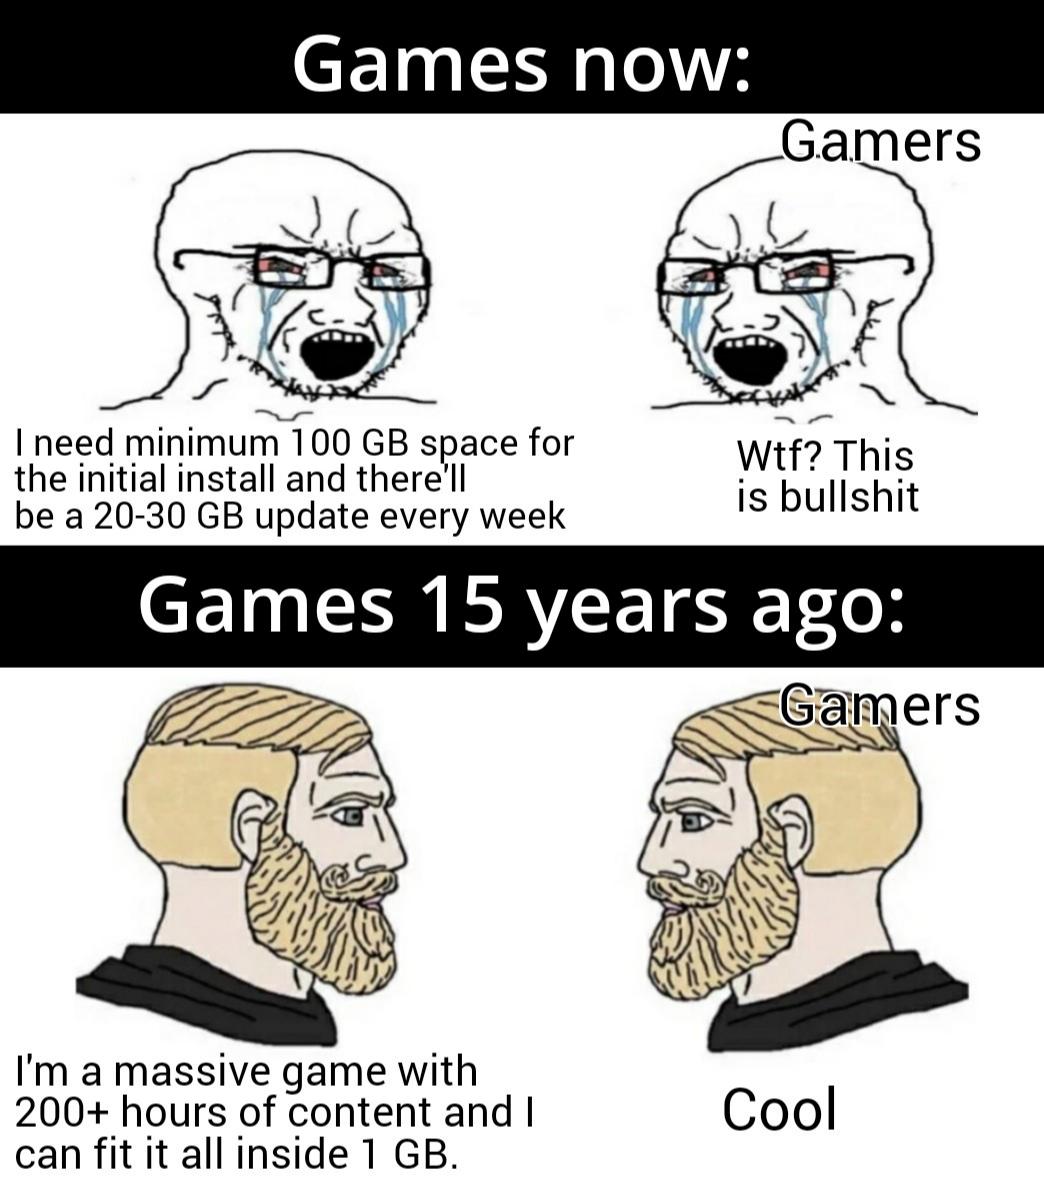 serious men meme - Games now Gamers I need minimum 100 Gb space for the initial install and there'll be a 2030 Gb update every week Wtf? This is bullshit Games 15 years ago Gamers I'm a massive game with 200 hours of content and I can fit it all inside 1 